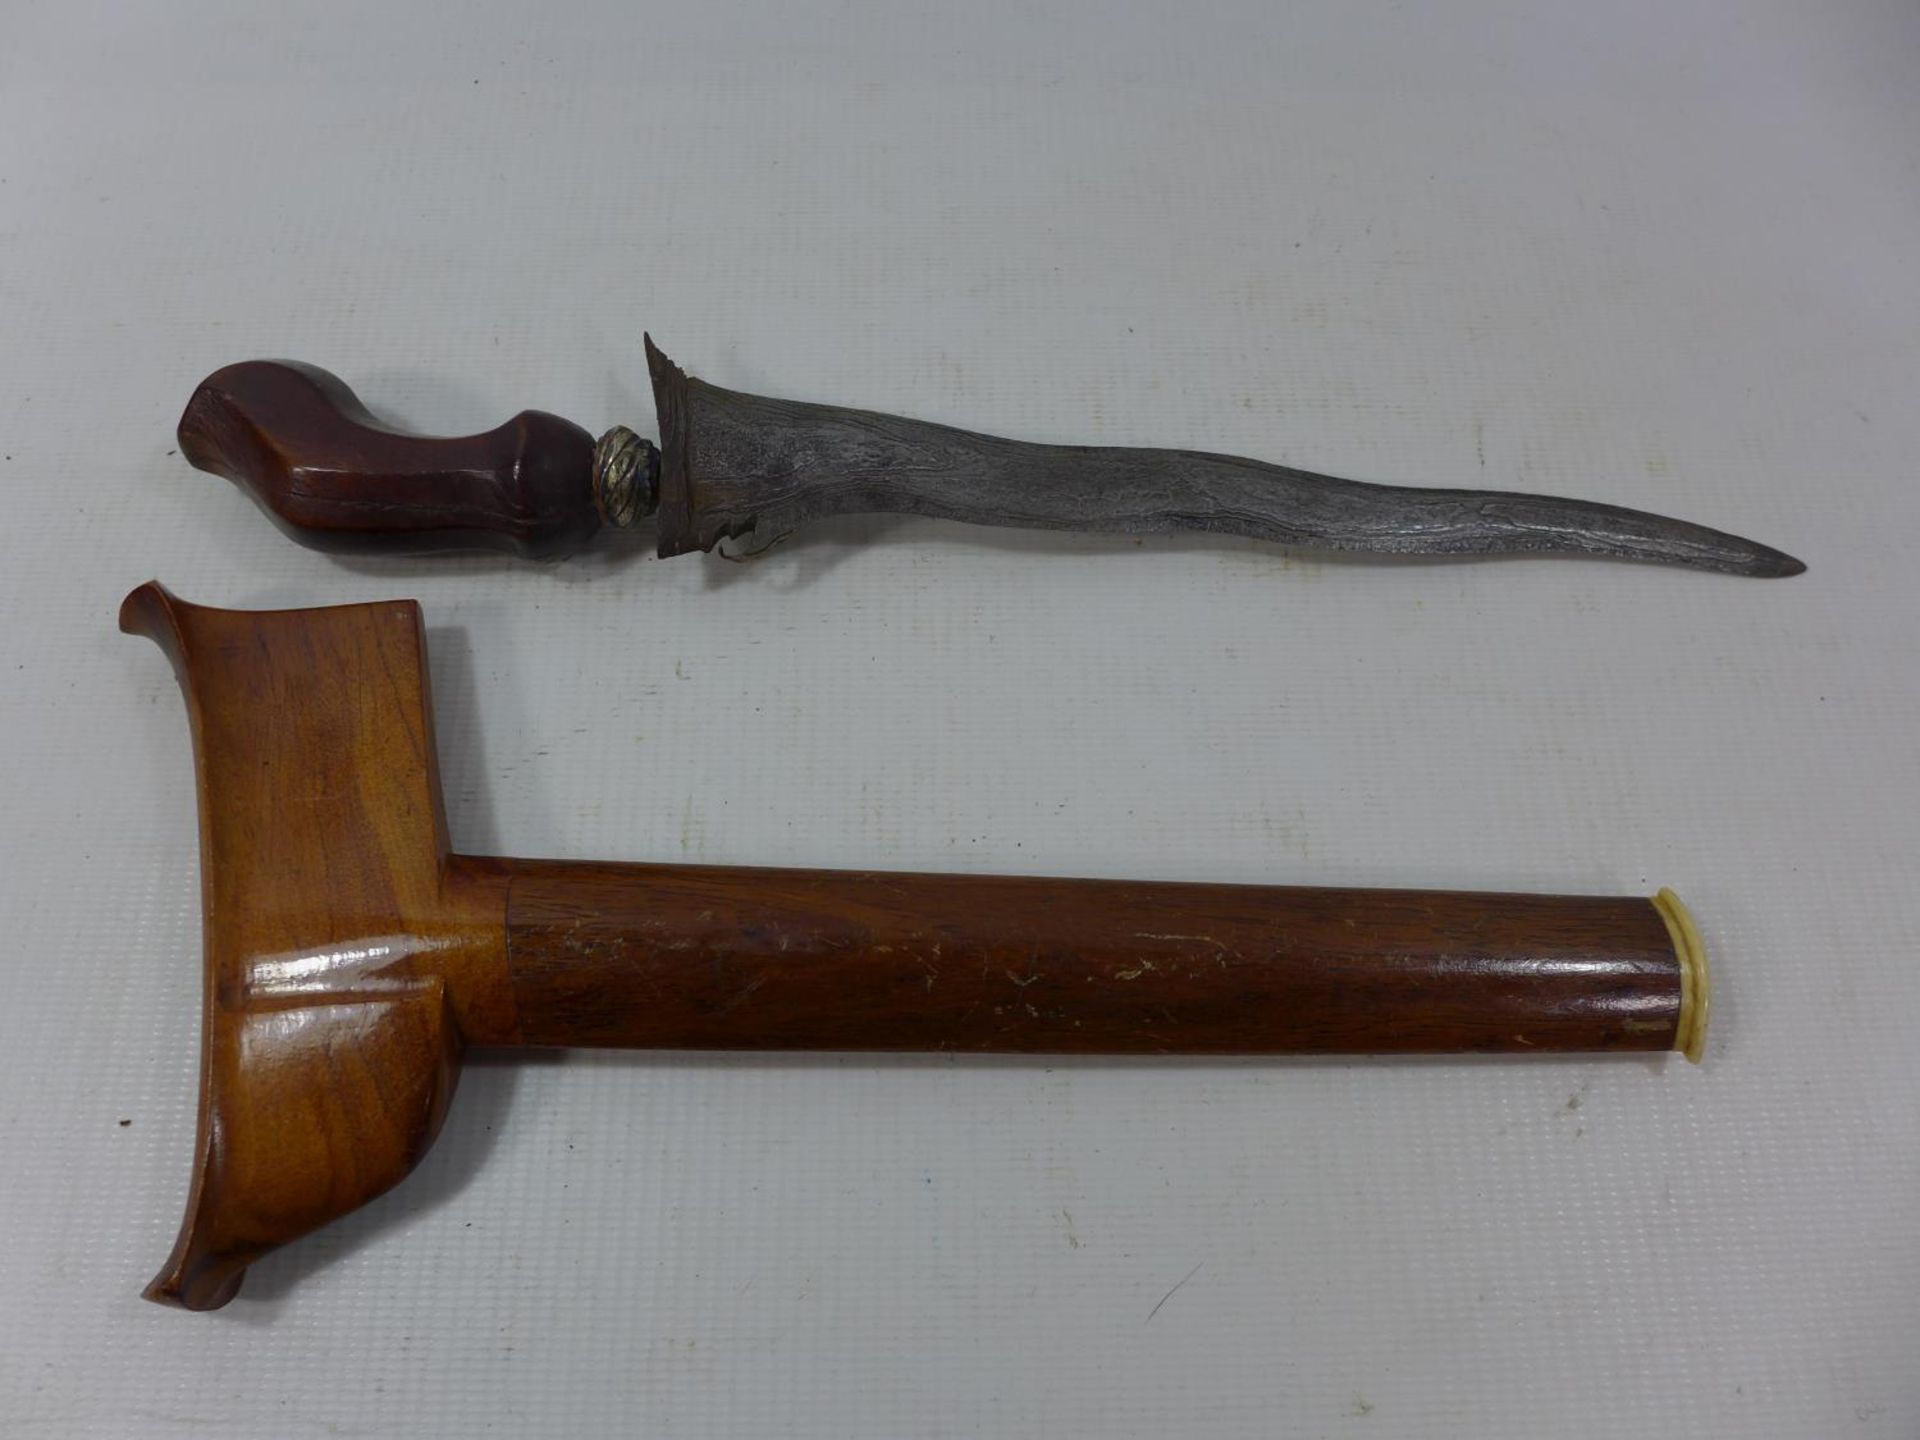 A BALANISE KRIS, 21CM WAVY BLADE, WOODEN GRIP AND SCABBARD